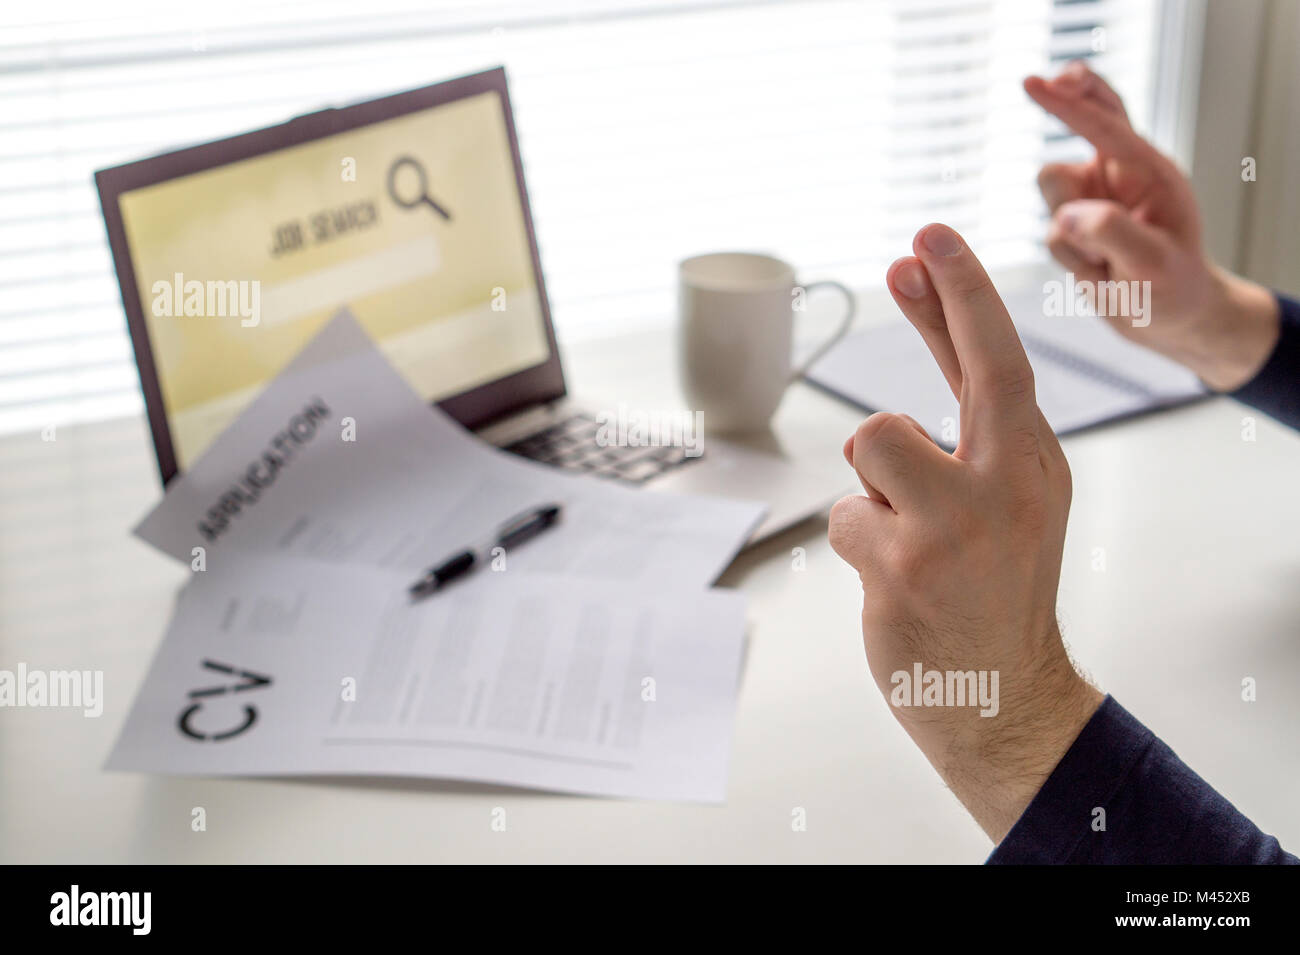 Fingers crossed to get work. Hopeful jobseeker with positive attitude. Motivated job applicant hoping to get hired after applying. Successful. Stock Photo